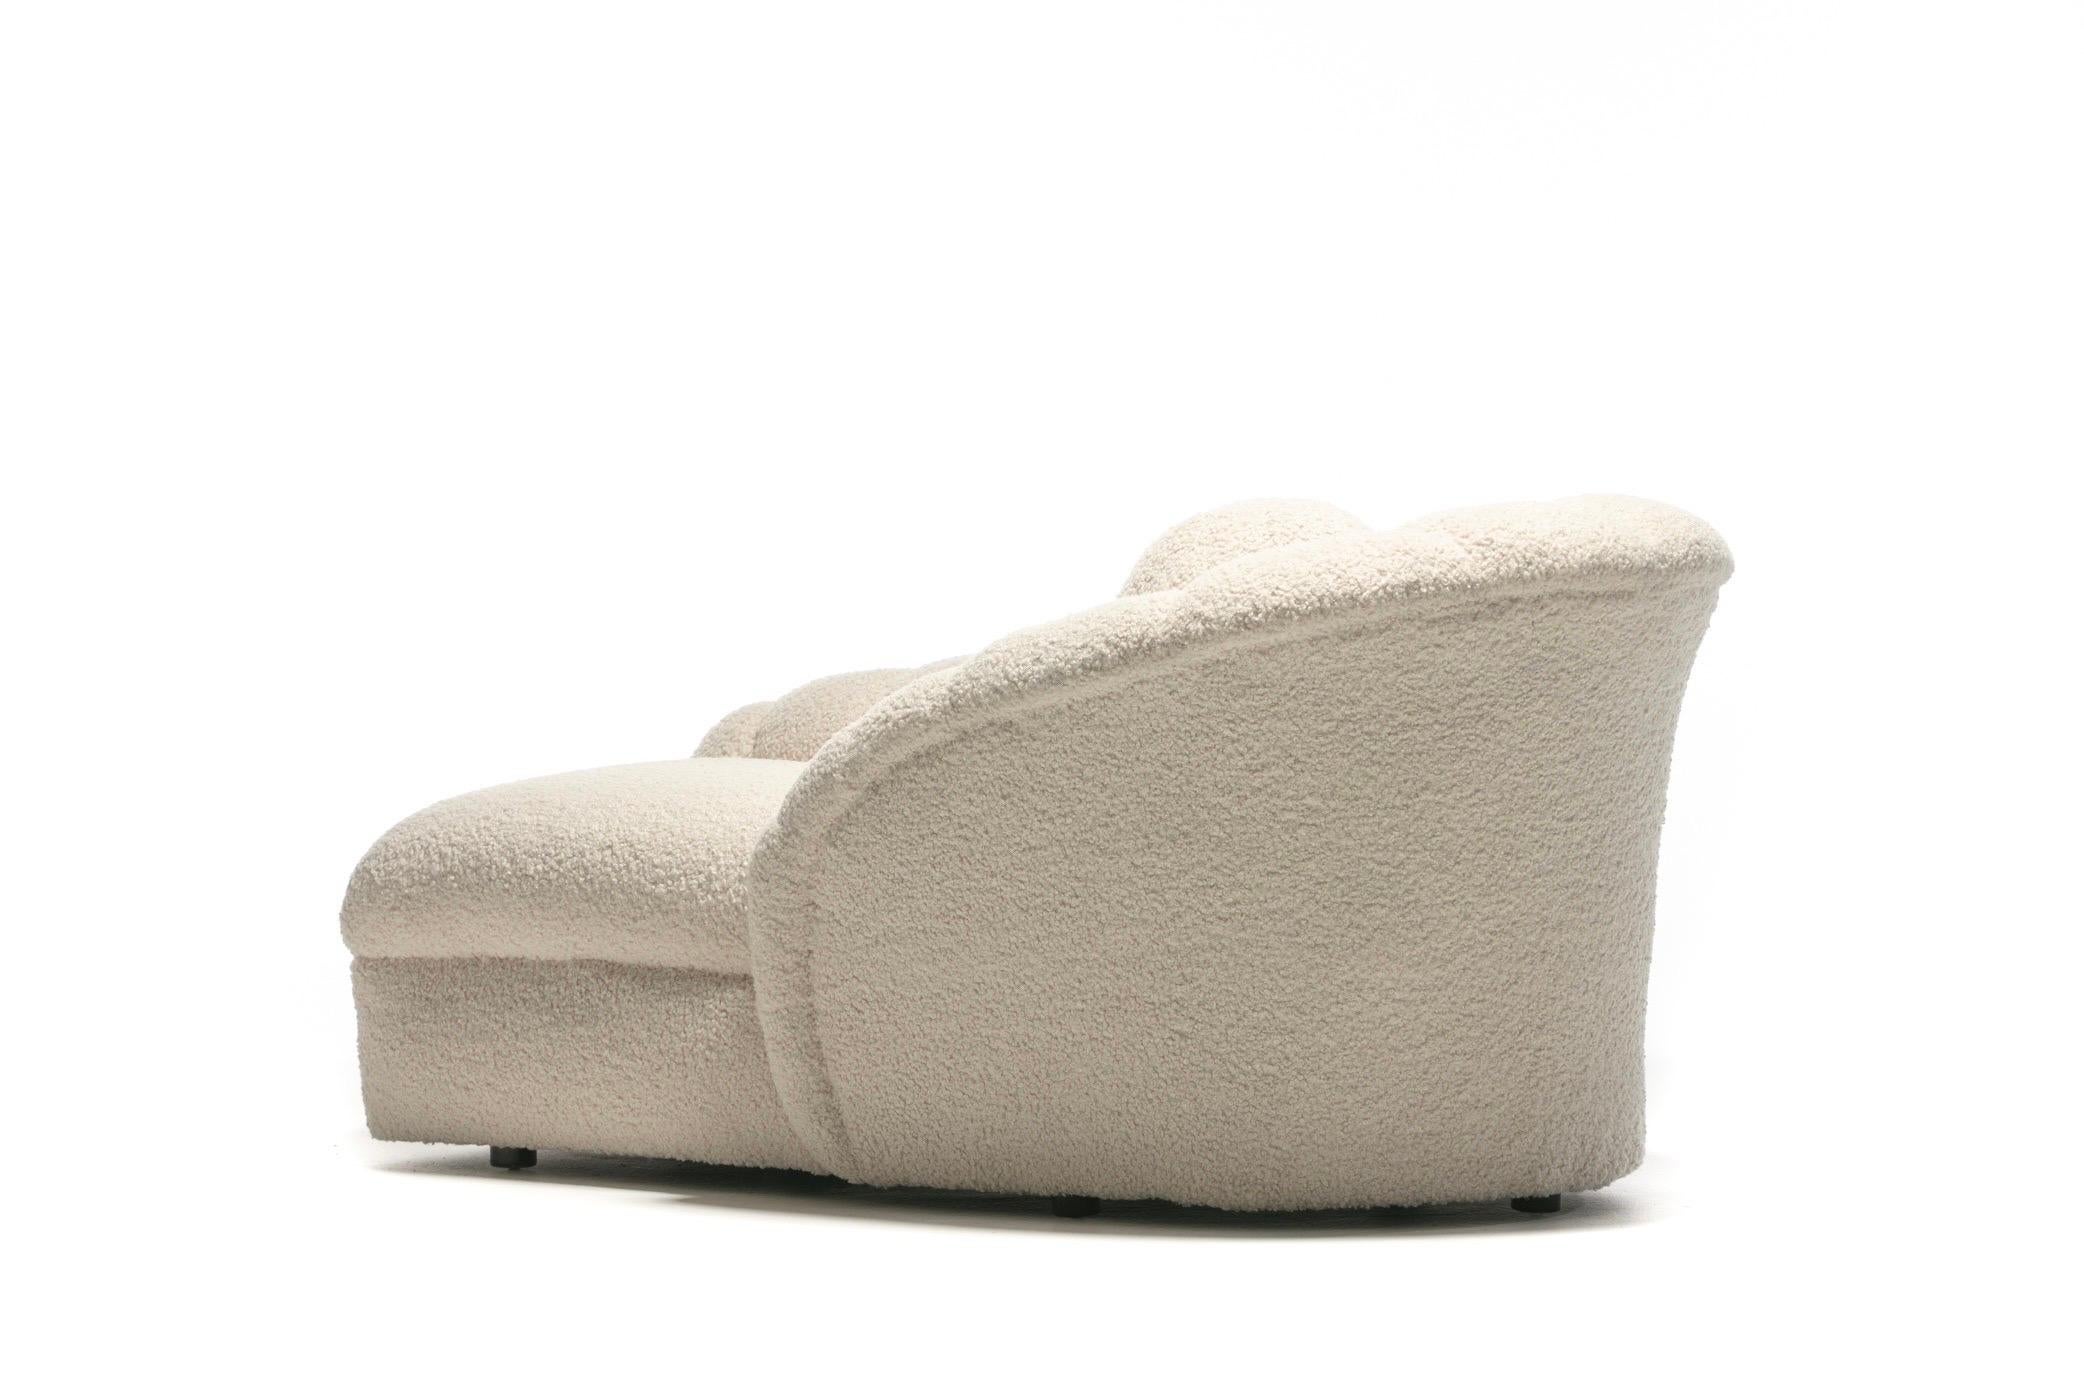 Vladimir Kagan Post Modern Clam Chaise Lounge in Soft Ivory White Bouclé 1980s For Sale 2